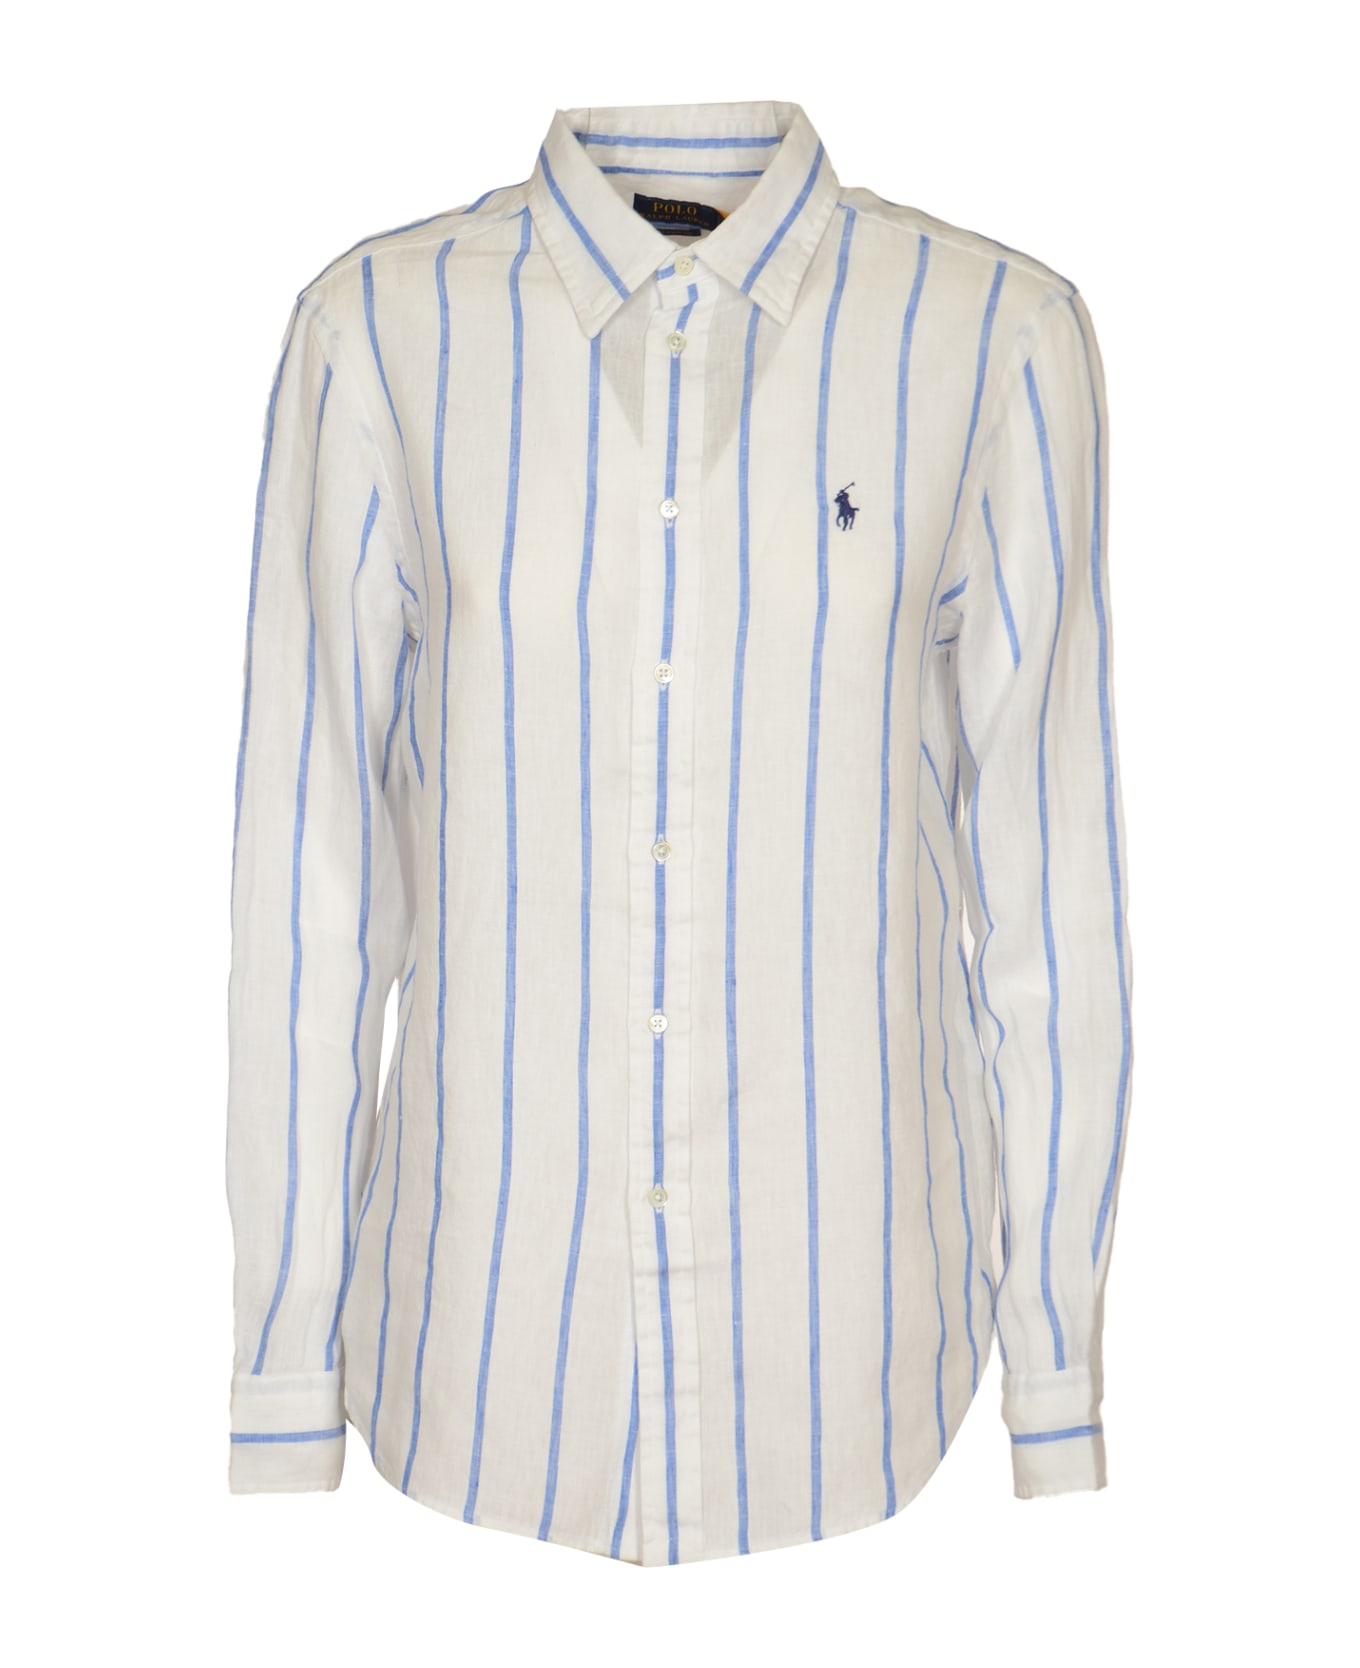 Polo Ralph Lauren Logo Embroidered Relaxed Fit Stripe Shirt - White/Blue